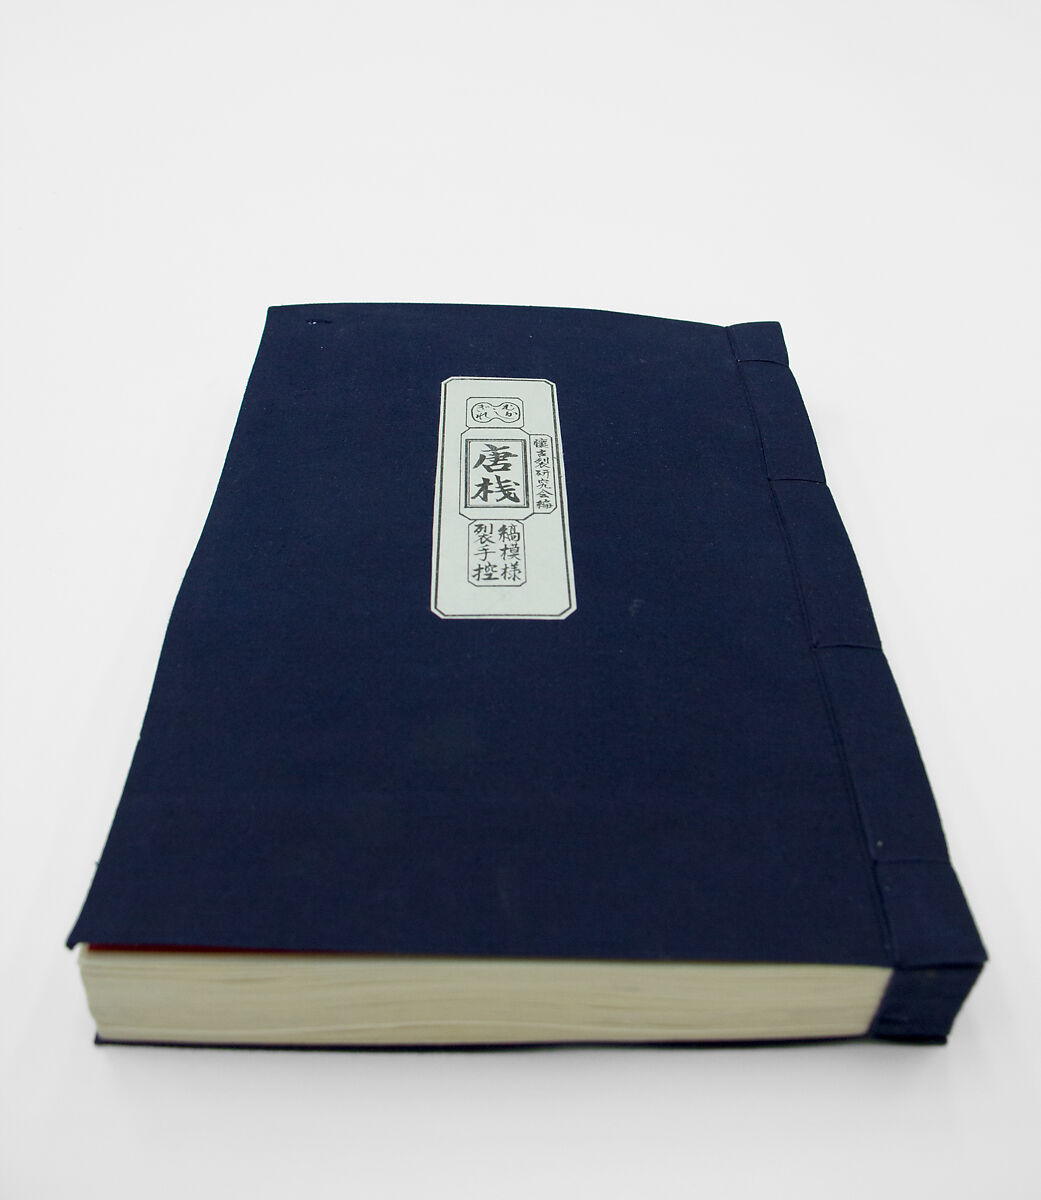 Tozan--shimamoyogire tebikae, 128 dyed and woven cotton swatches "Kozan" mounted in book form, Japan 